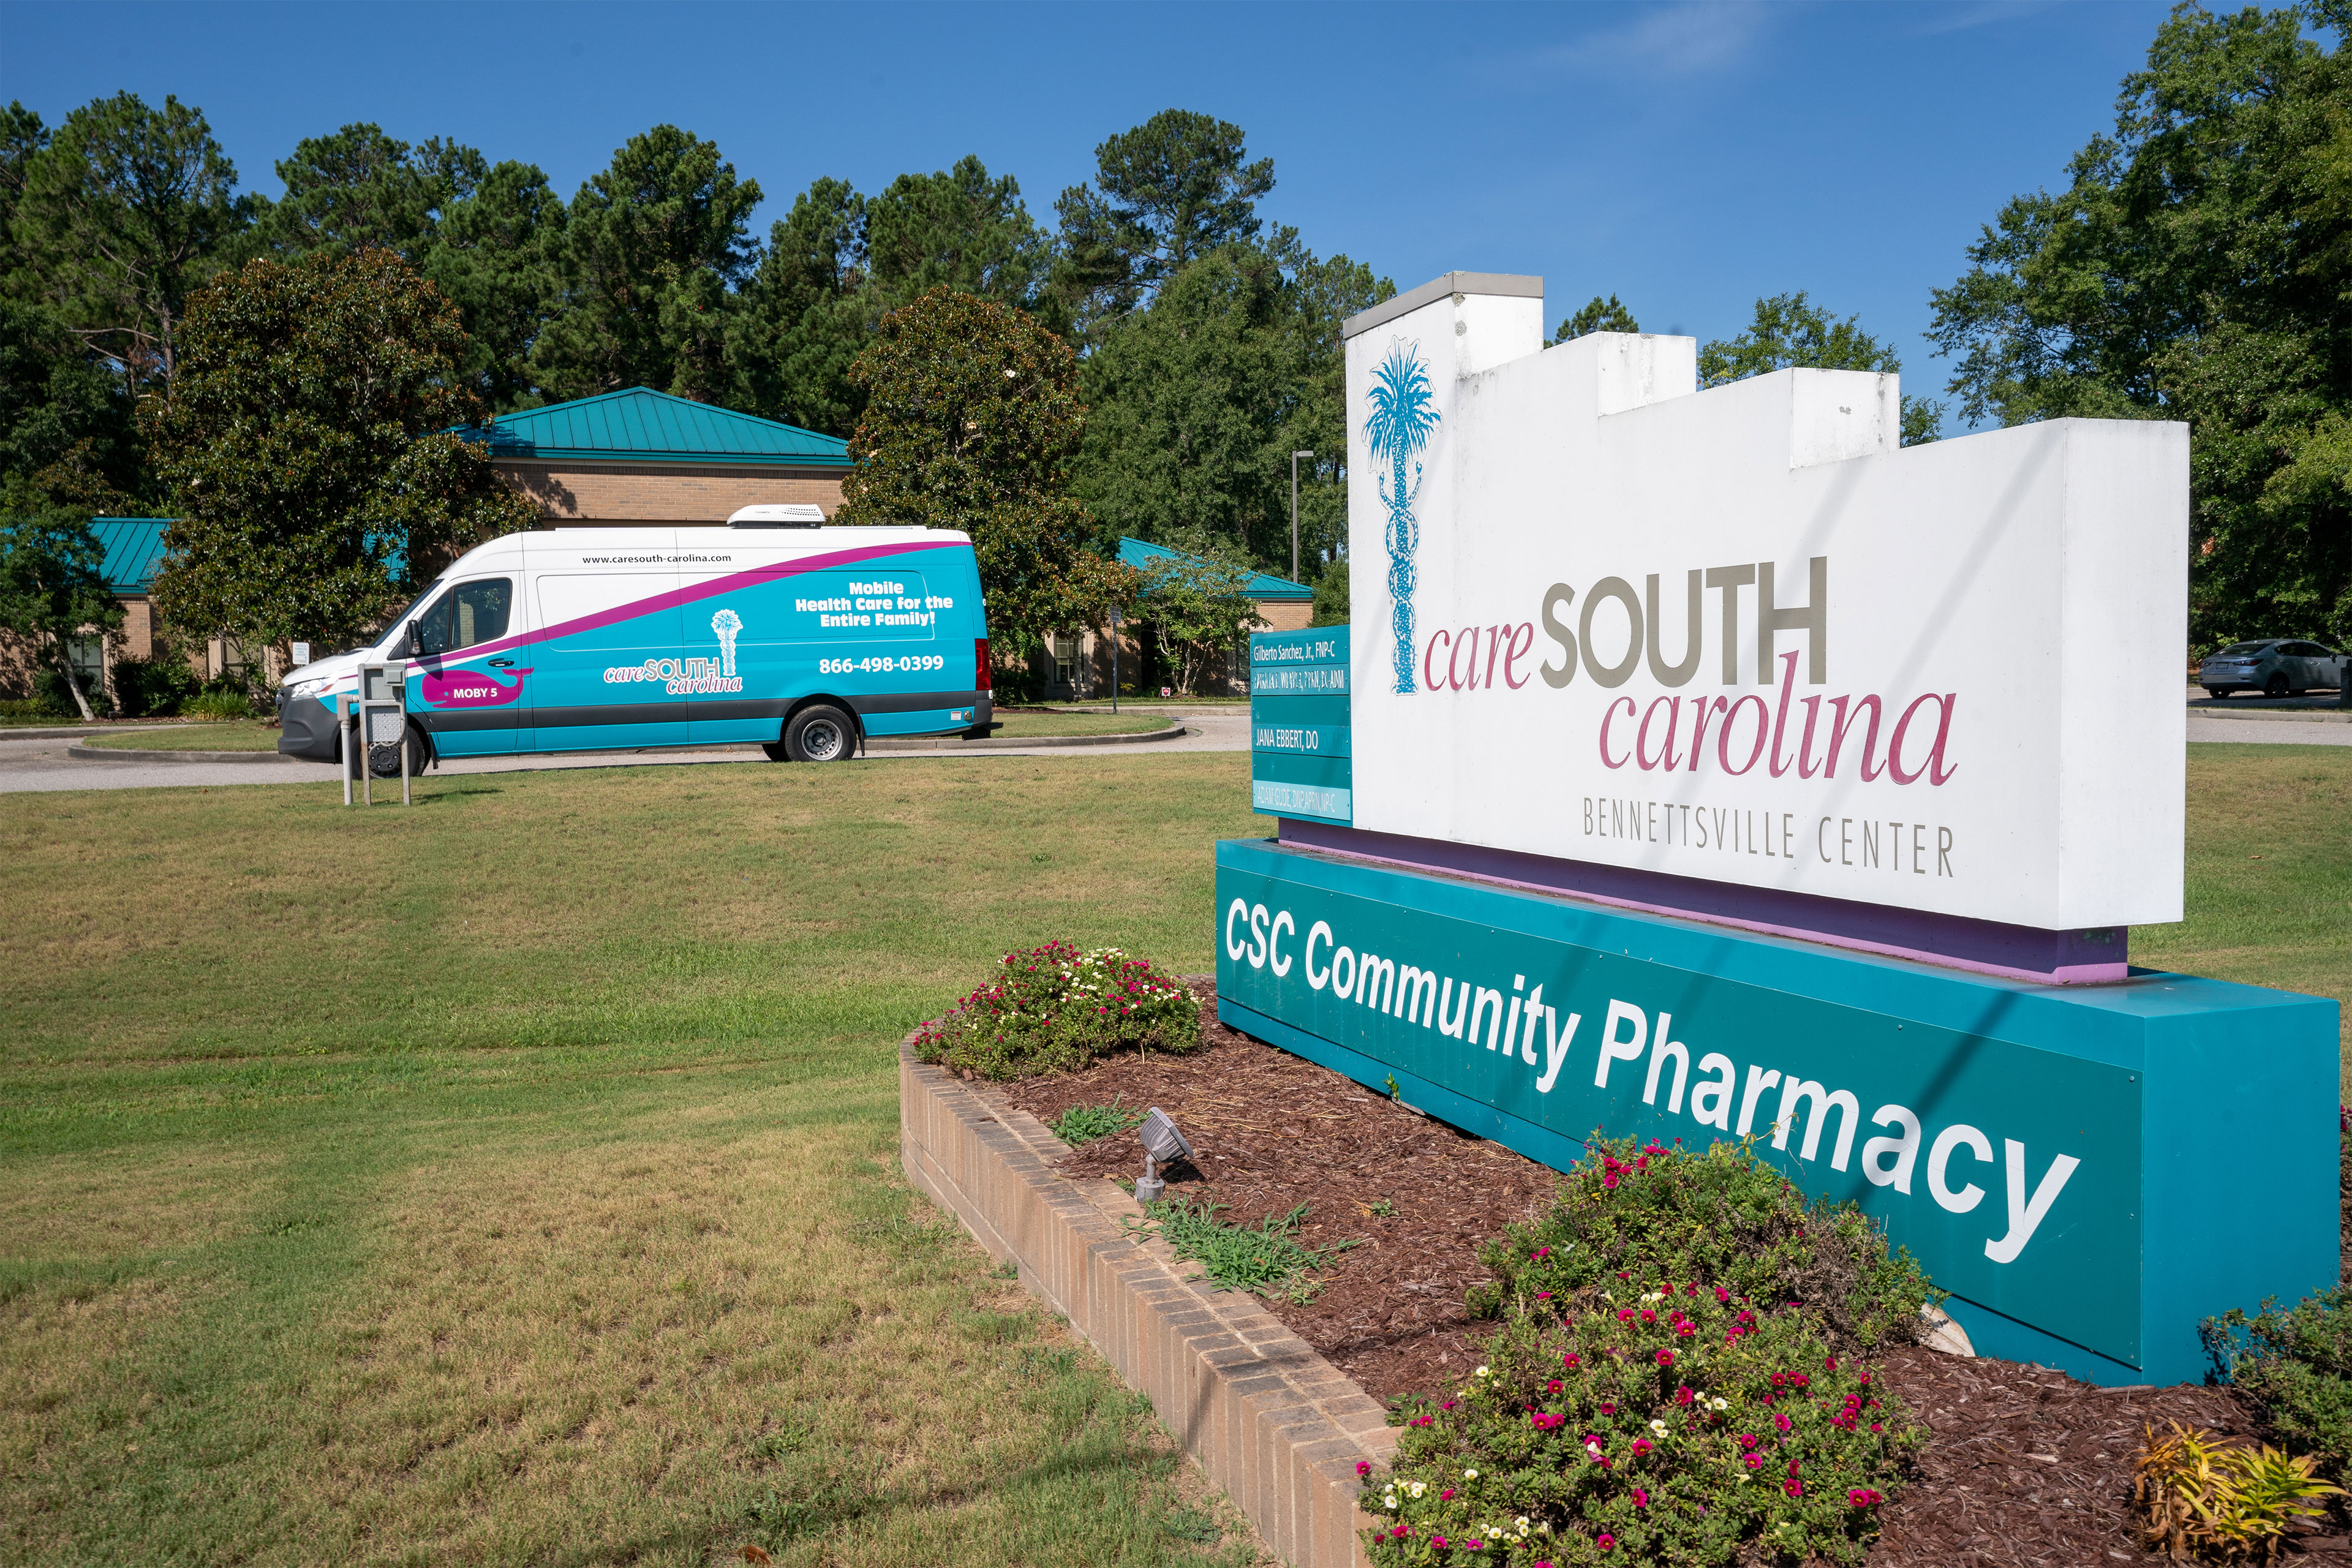 A momument sign reads "care SOUTH carolina", "Bennettsville Center", and "CSC Community Pharmacy". About 50 feet beyond the sign is a parked van also marked "care South carolina".